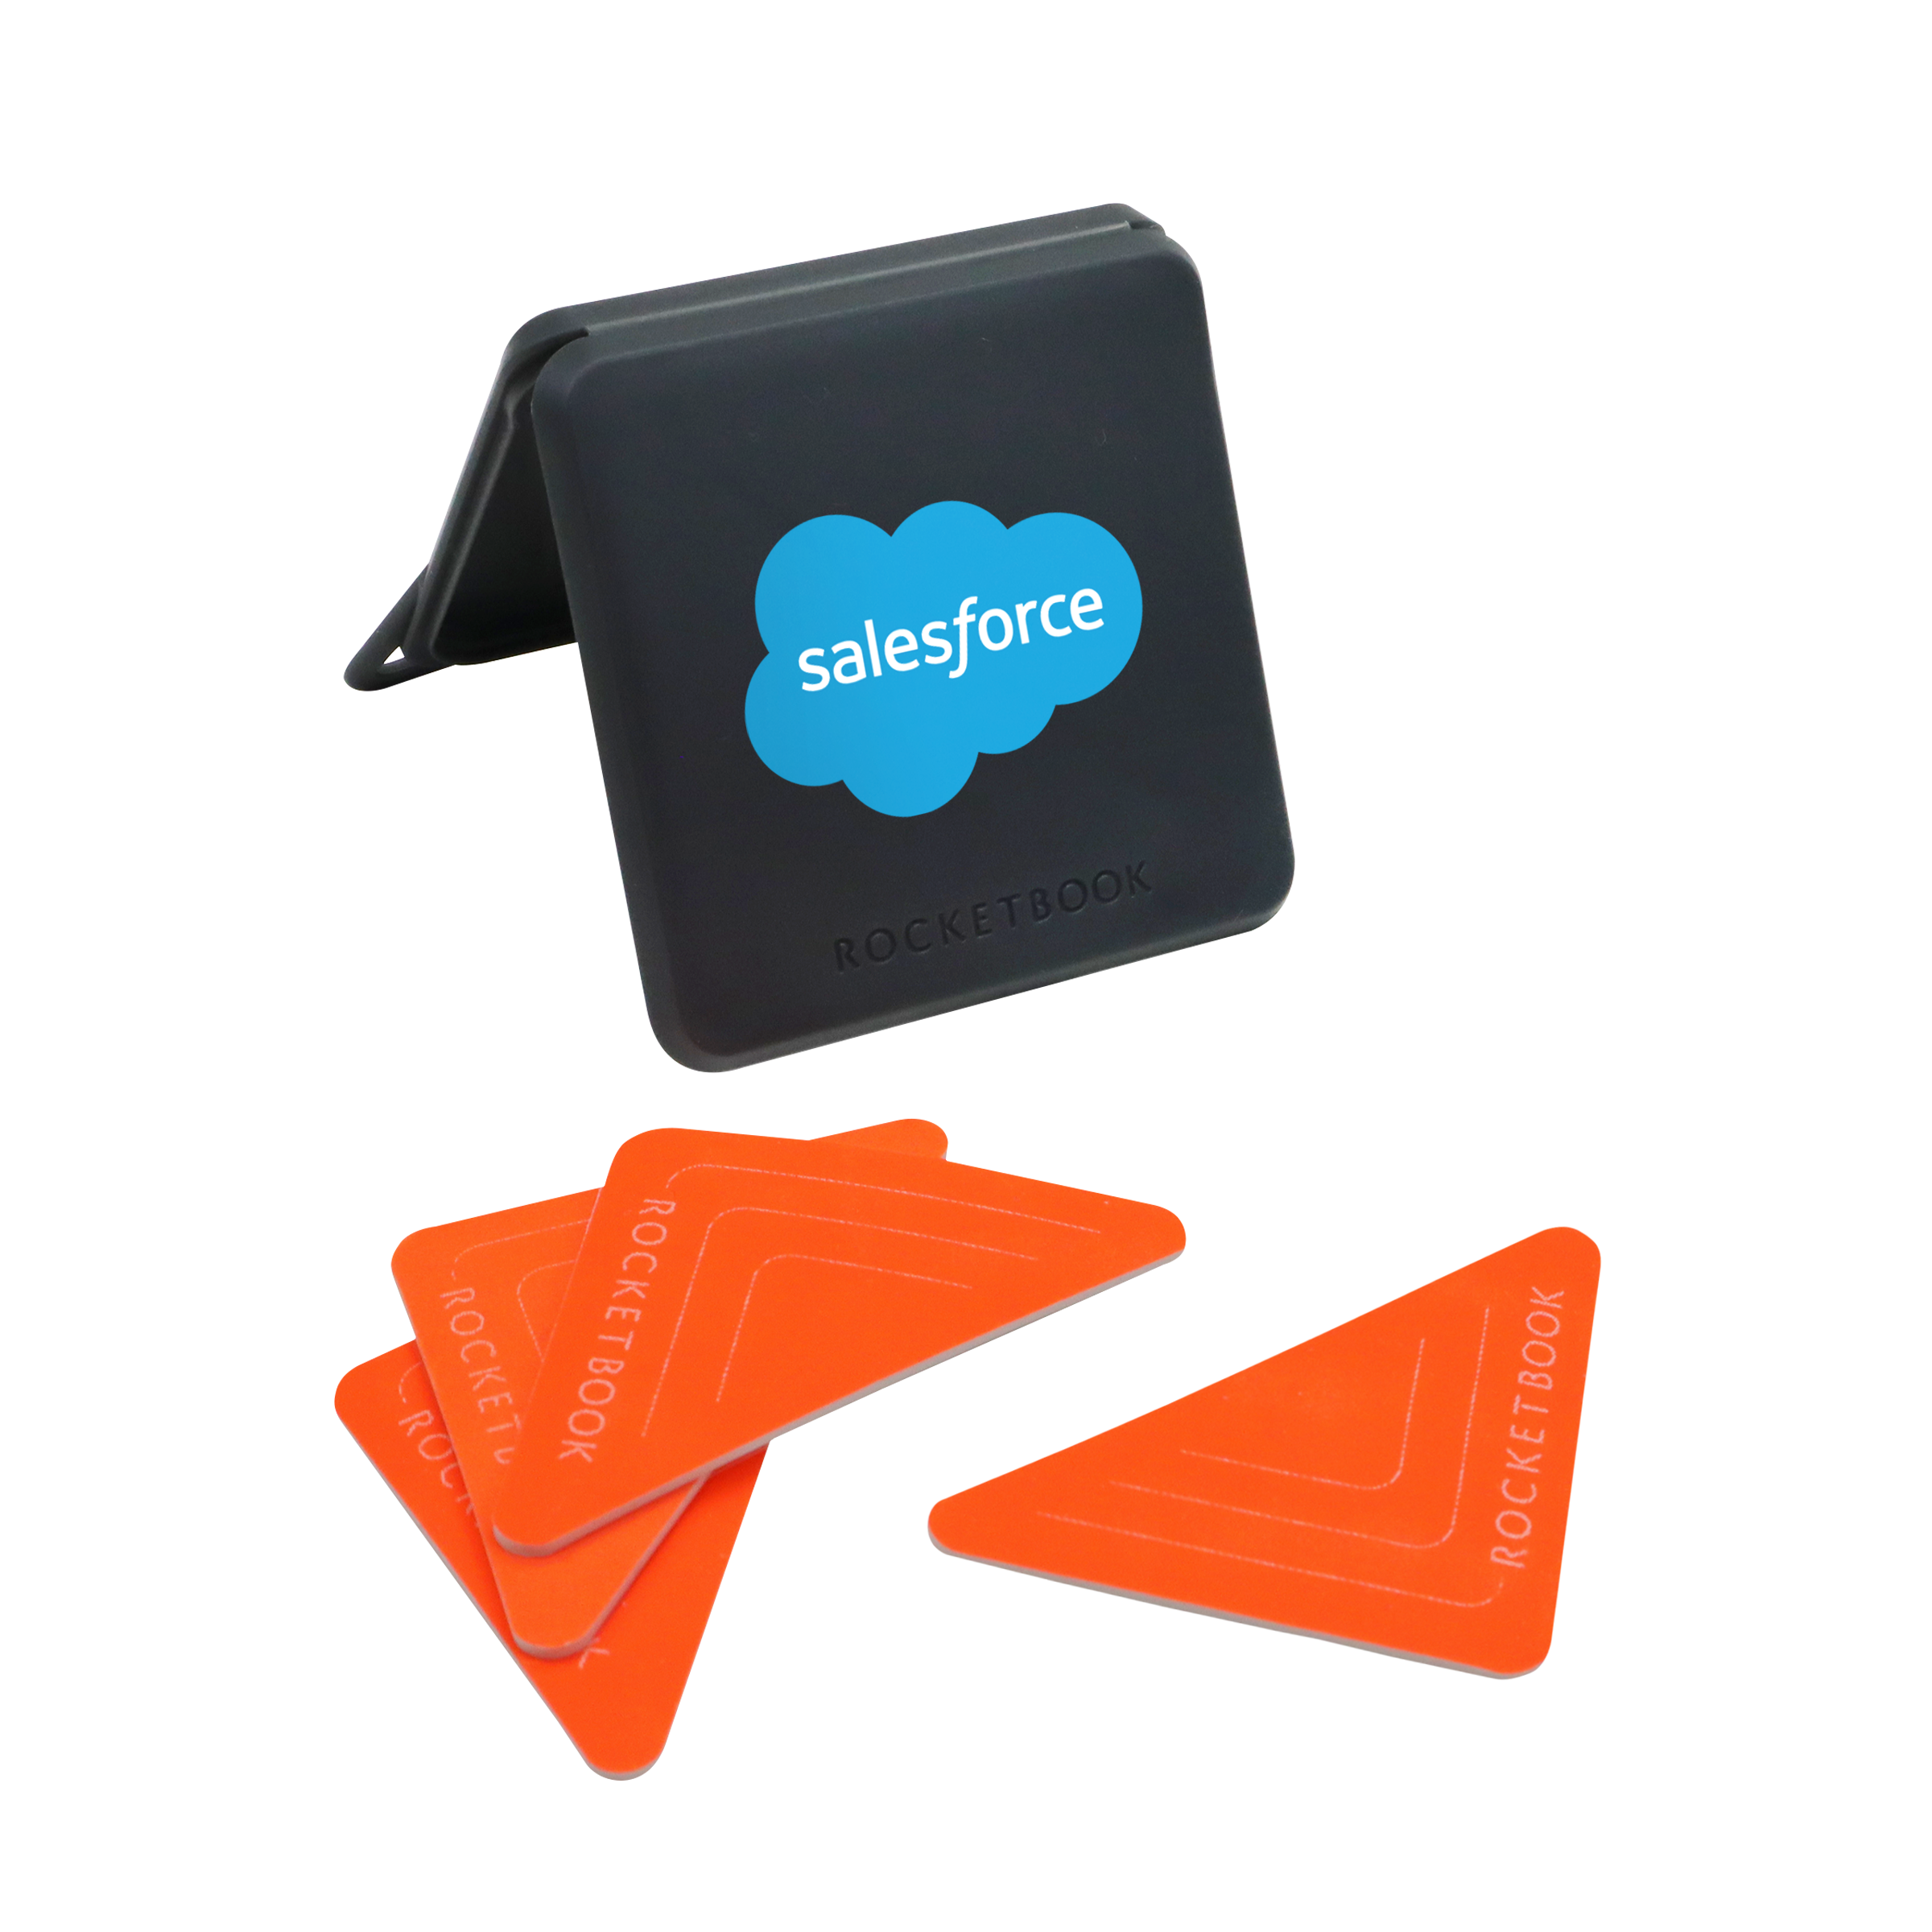 BEA-A4-K Rocketbook Beacons - Digitize Your Whiteboard - Reusable Stickers  To Upload Your Whiteboard Notes To The Cloud with Carrying Cas